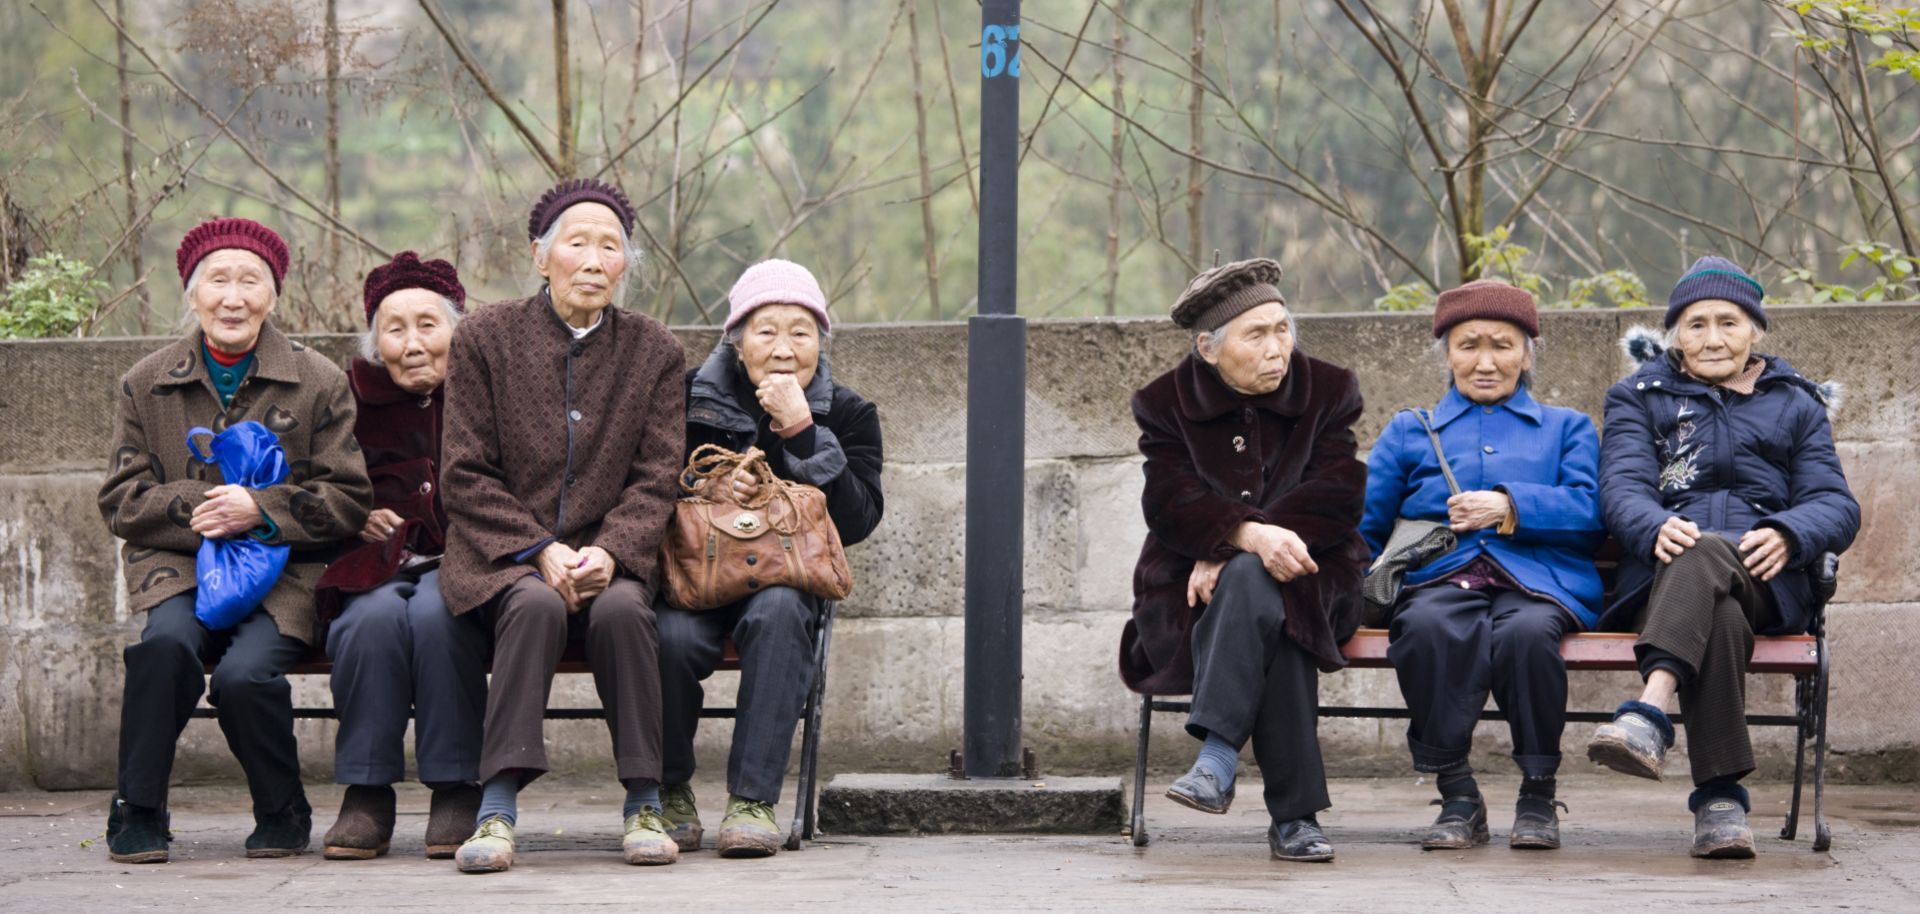 Elderly women sit together on benches in Chongqing, China.